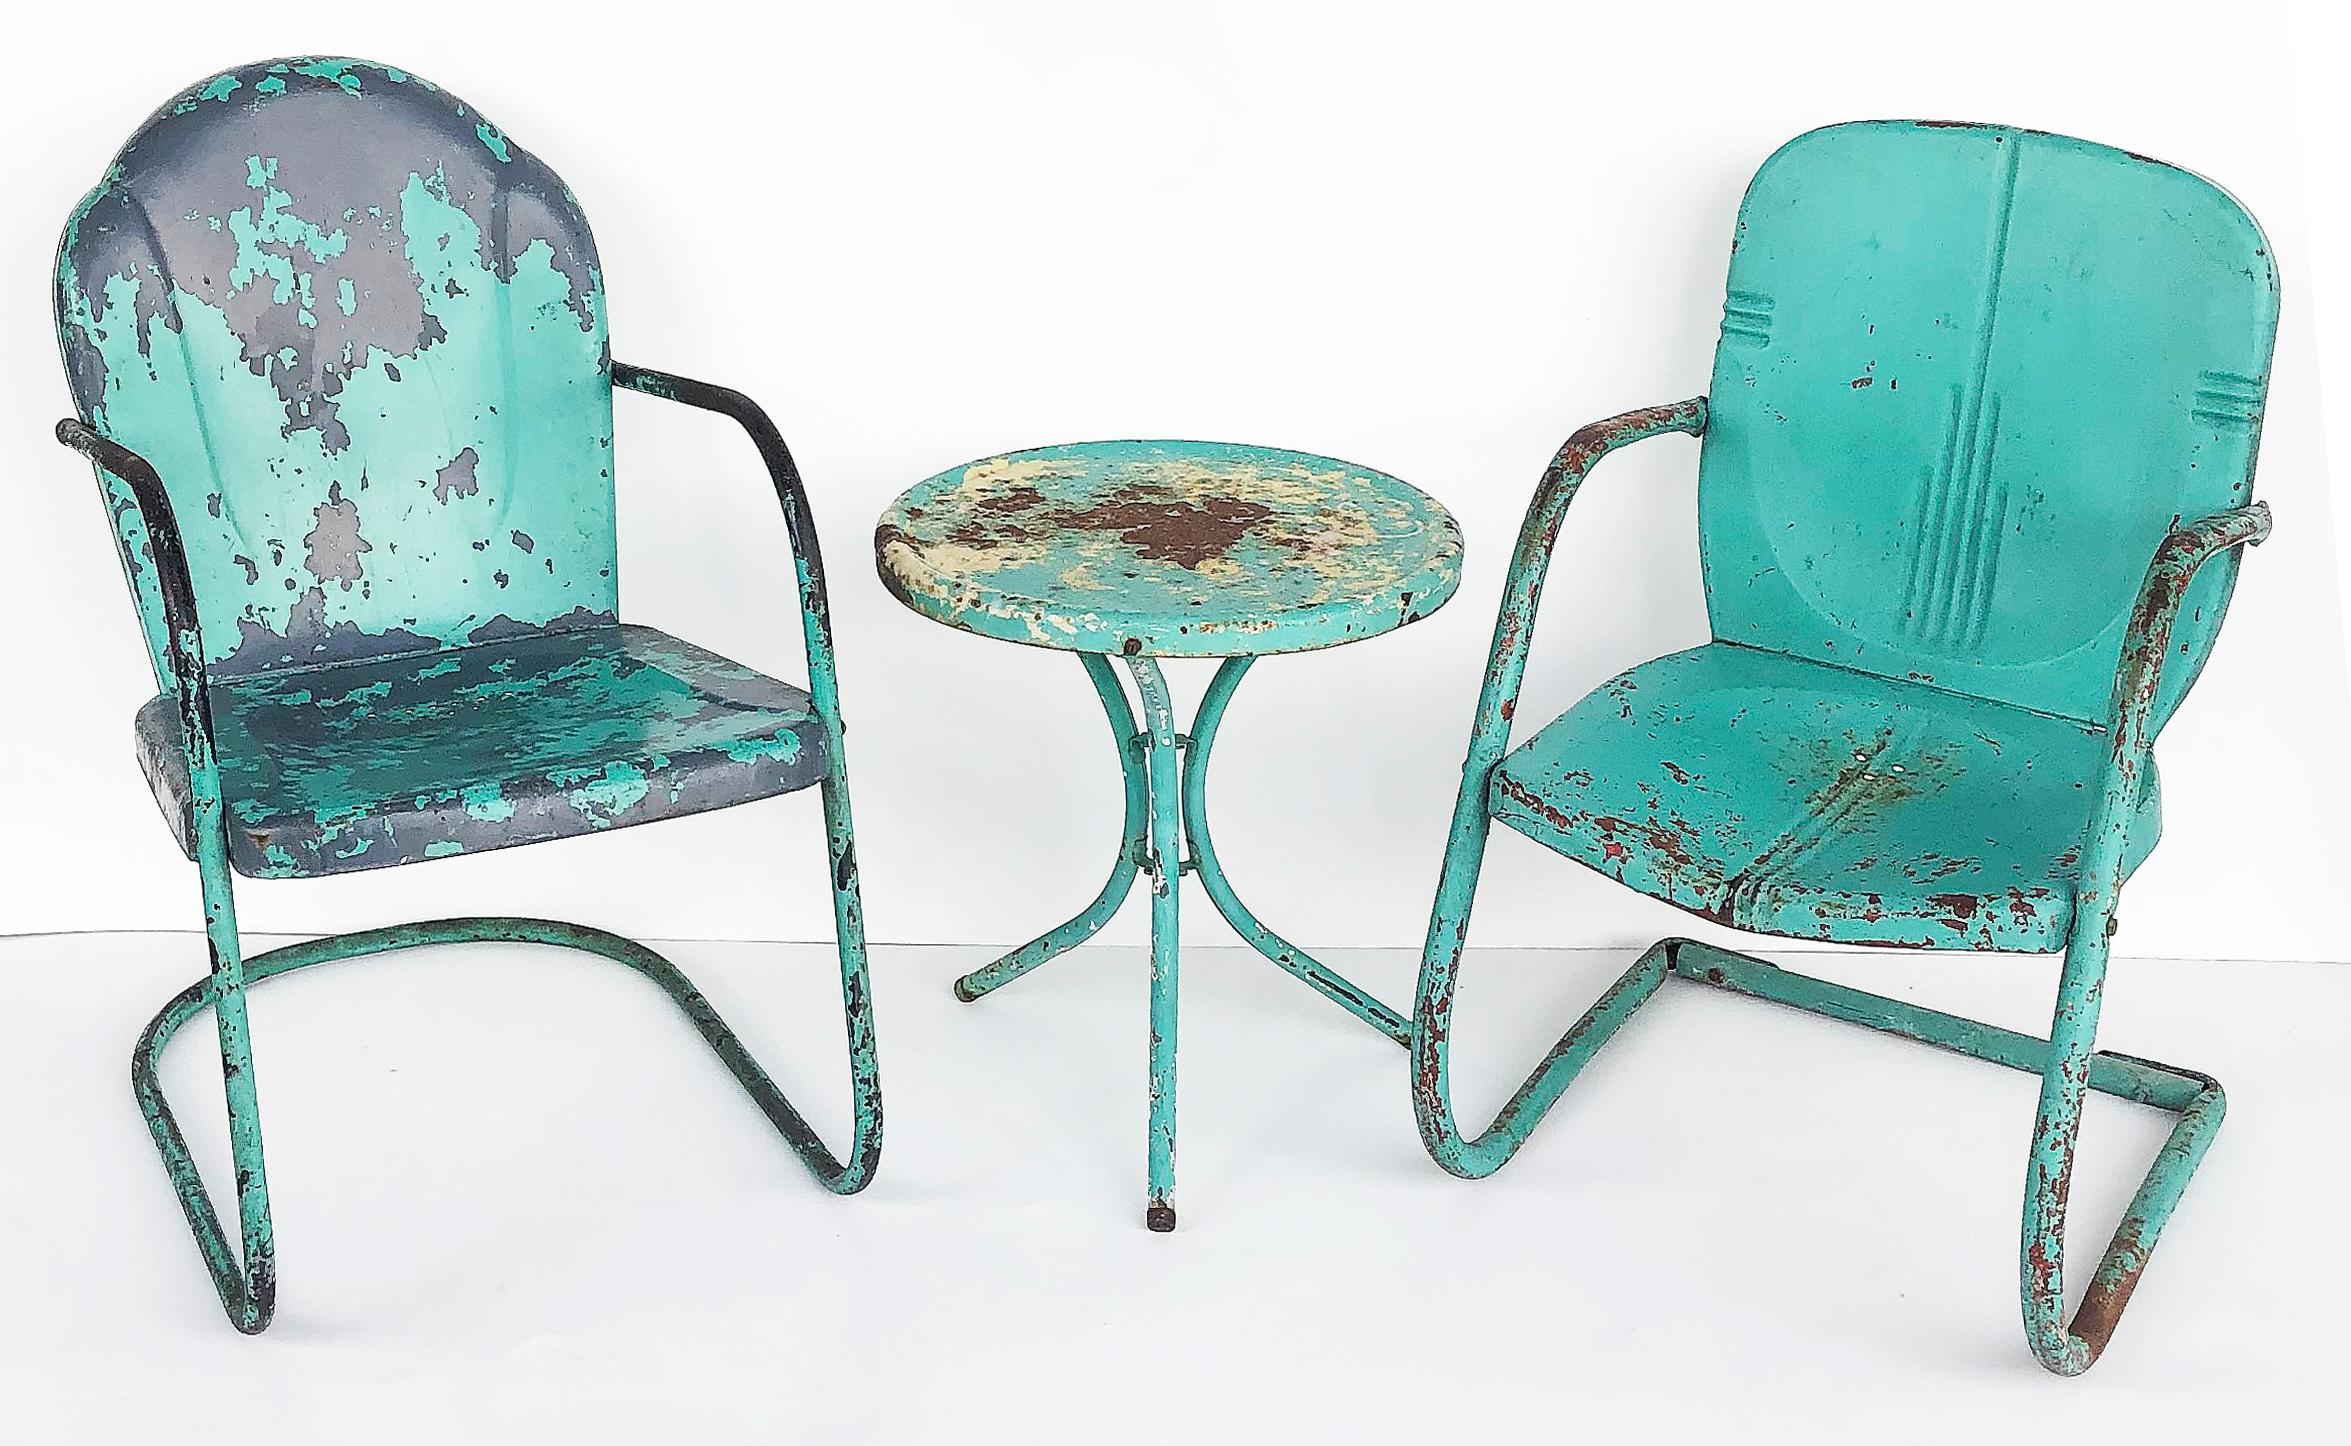 Shabby chic painted metal garden chairs & table set of 3

Offered for sale is a vintage Mid-century Modern set of two similar iron cantilever garden chairs and a companion side table. The set had last been painted turquoise over previous colors.